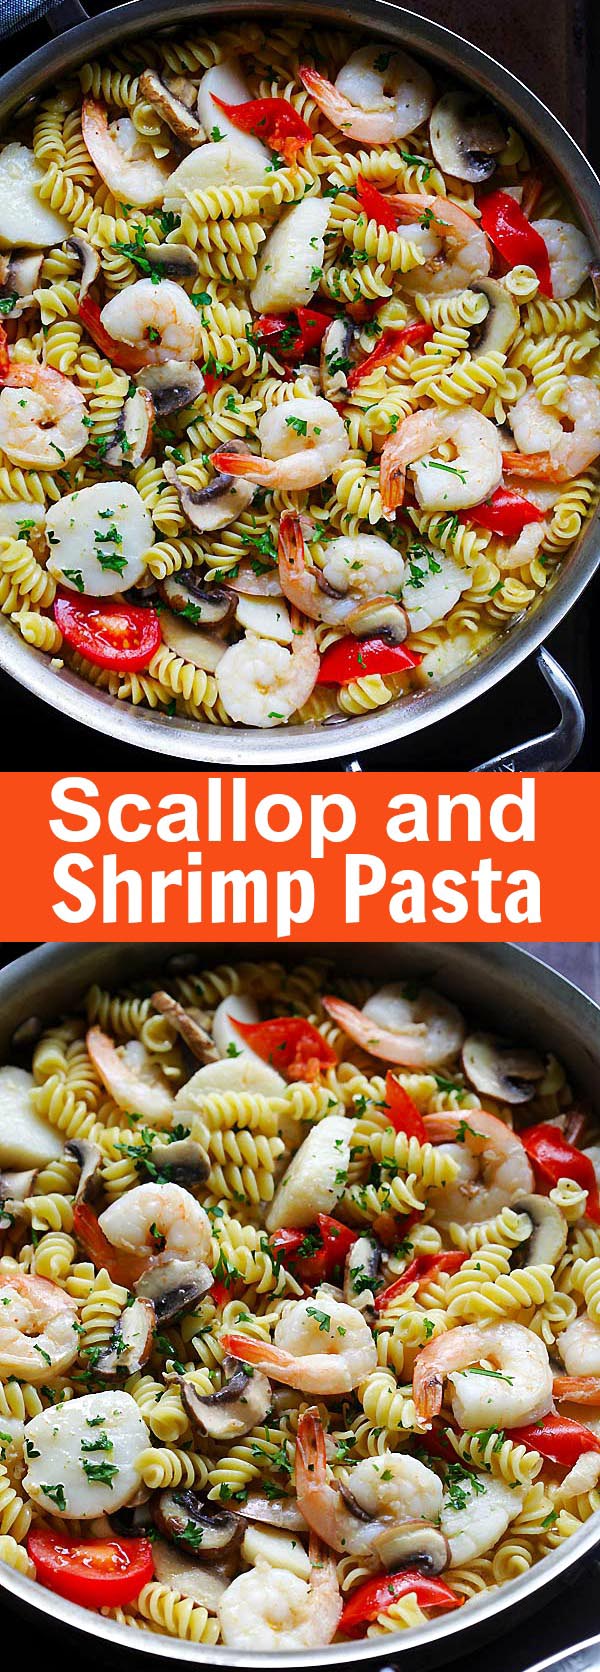 Scallop and Shrimp Pasta – Easy scallop and shrimp pasta cooked to perfection like Italian restaurants. Delicious dinner for the family | rasamalaysia.com